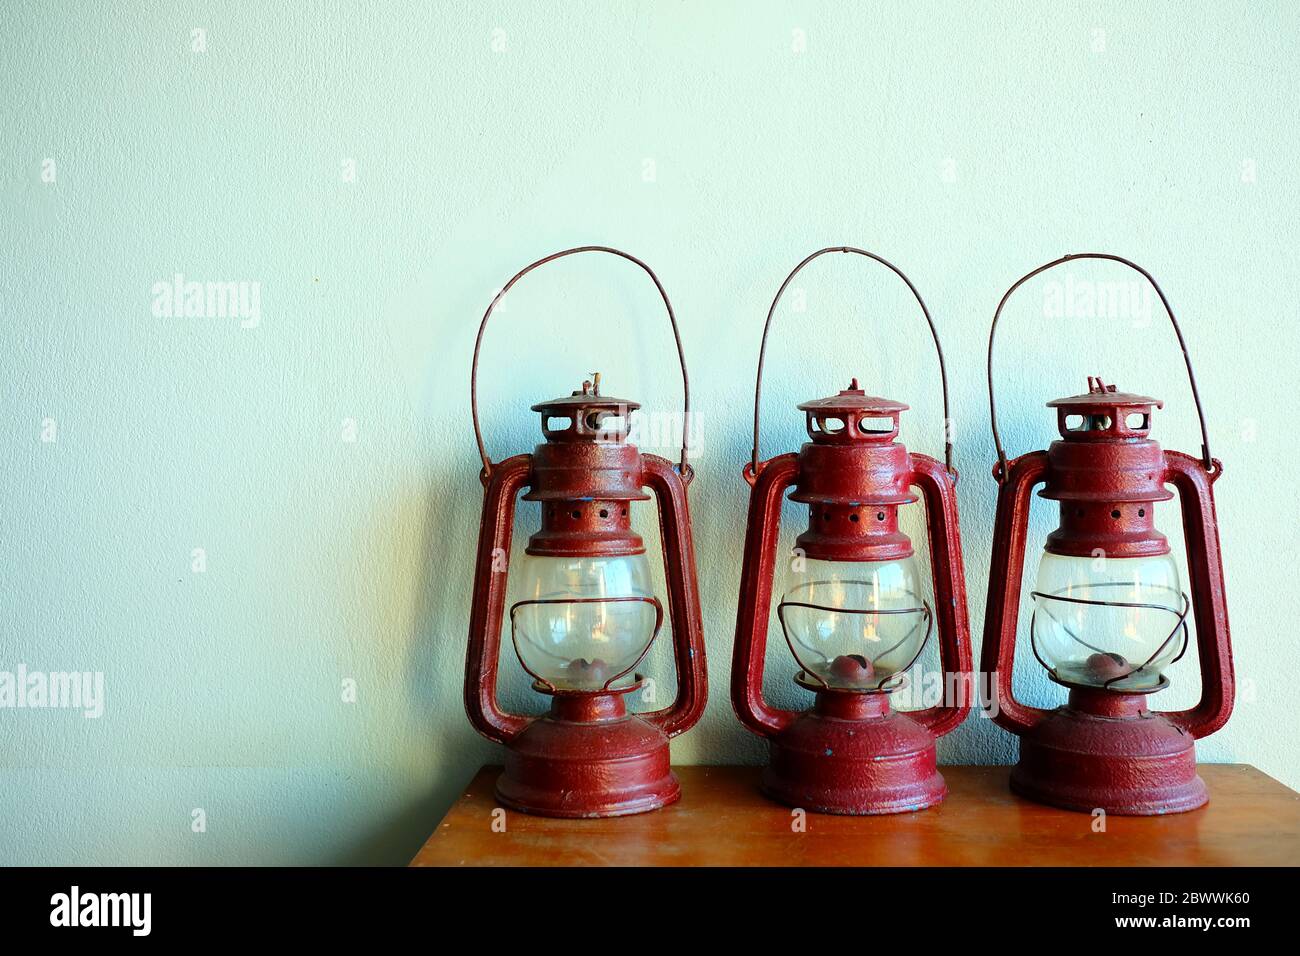 Vintage Red Paraffin Lamps on Wooden Table with White Concrete Wall Background. Stock Photo